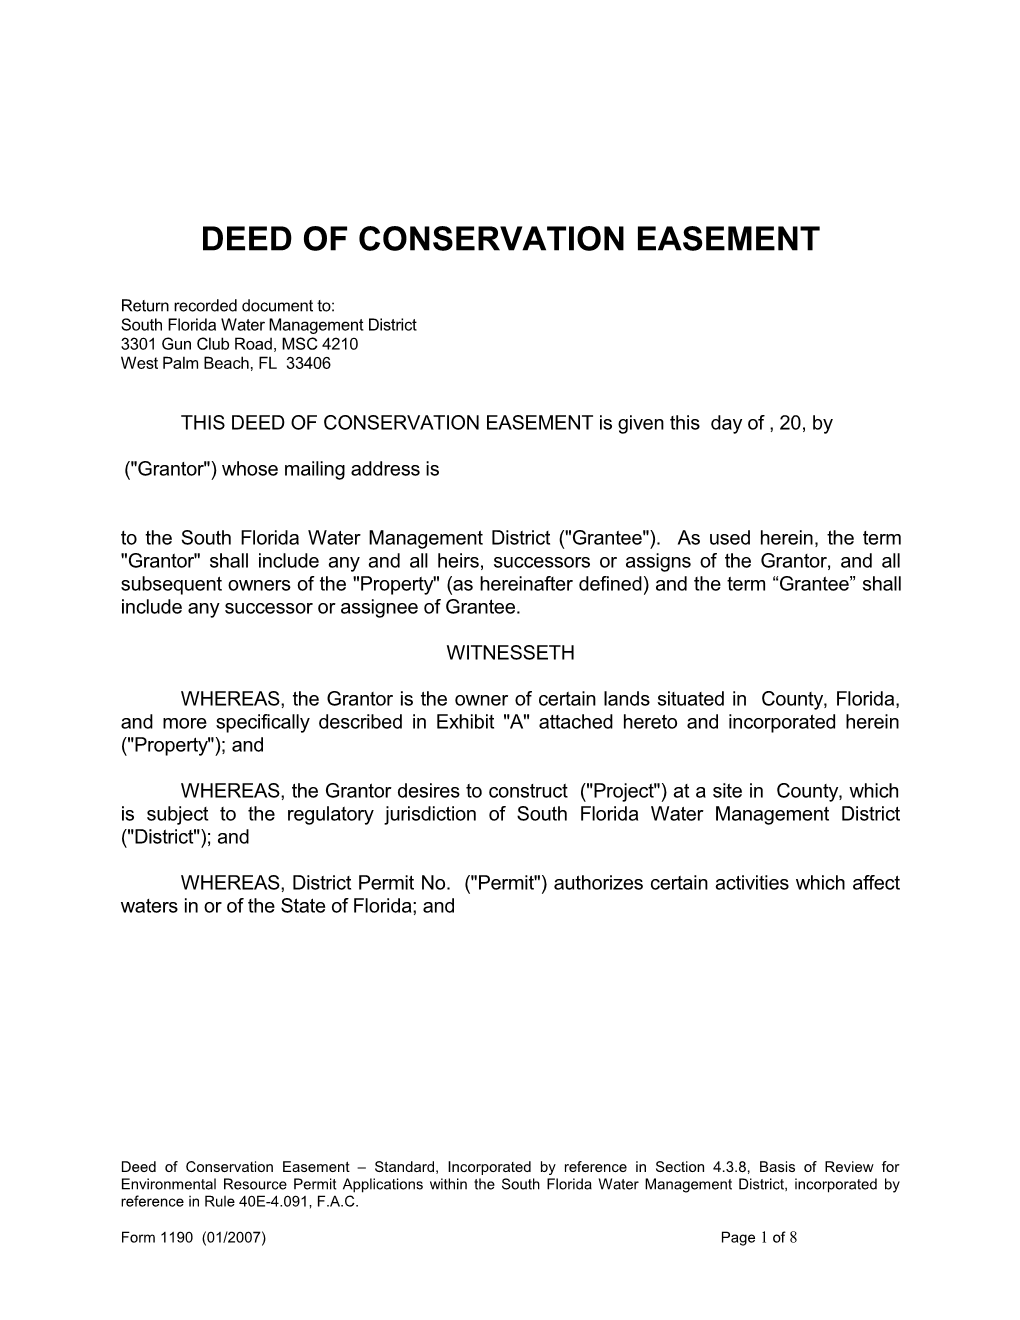 Deed of Conservation Easement